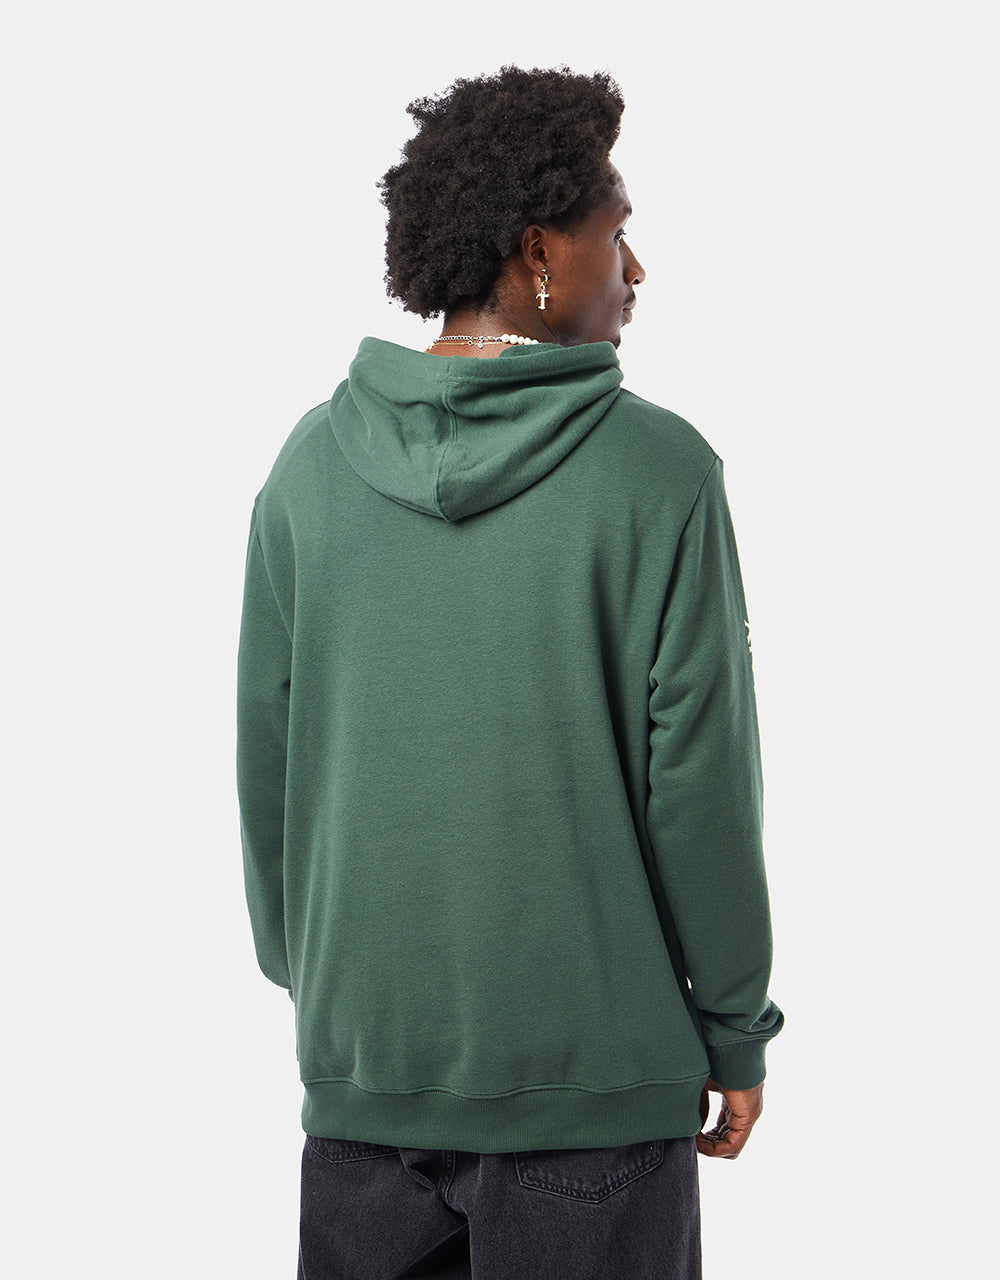 DC Outdoorsman Pullover Hoodie - Sycamore